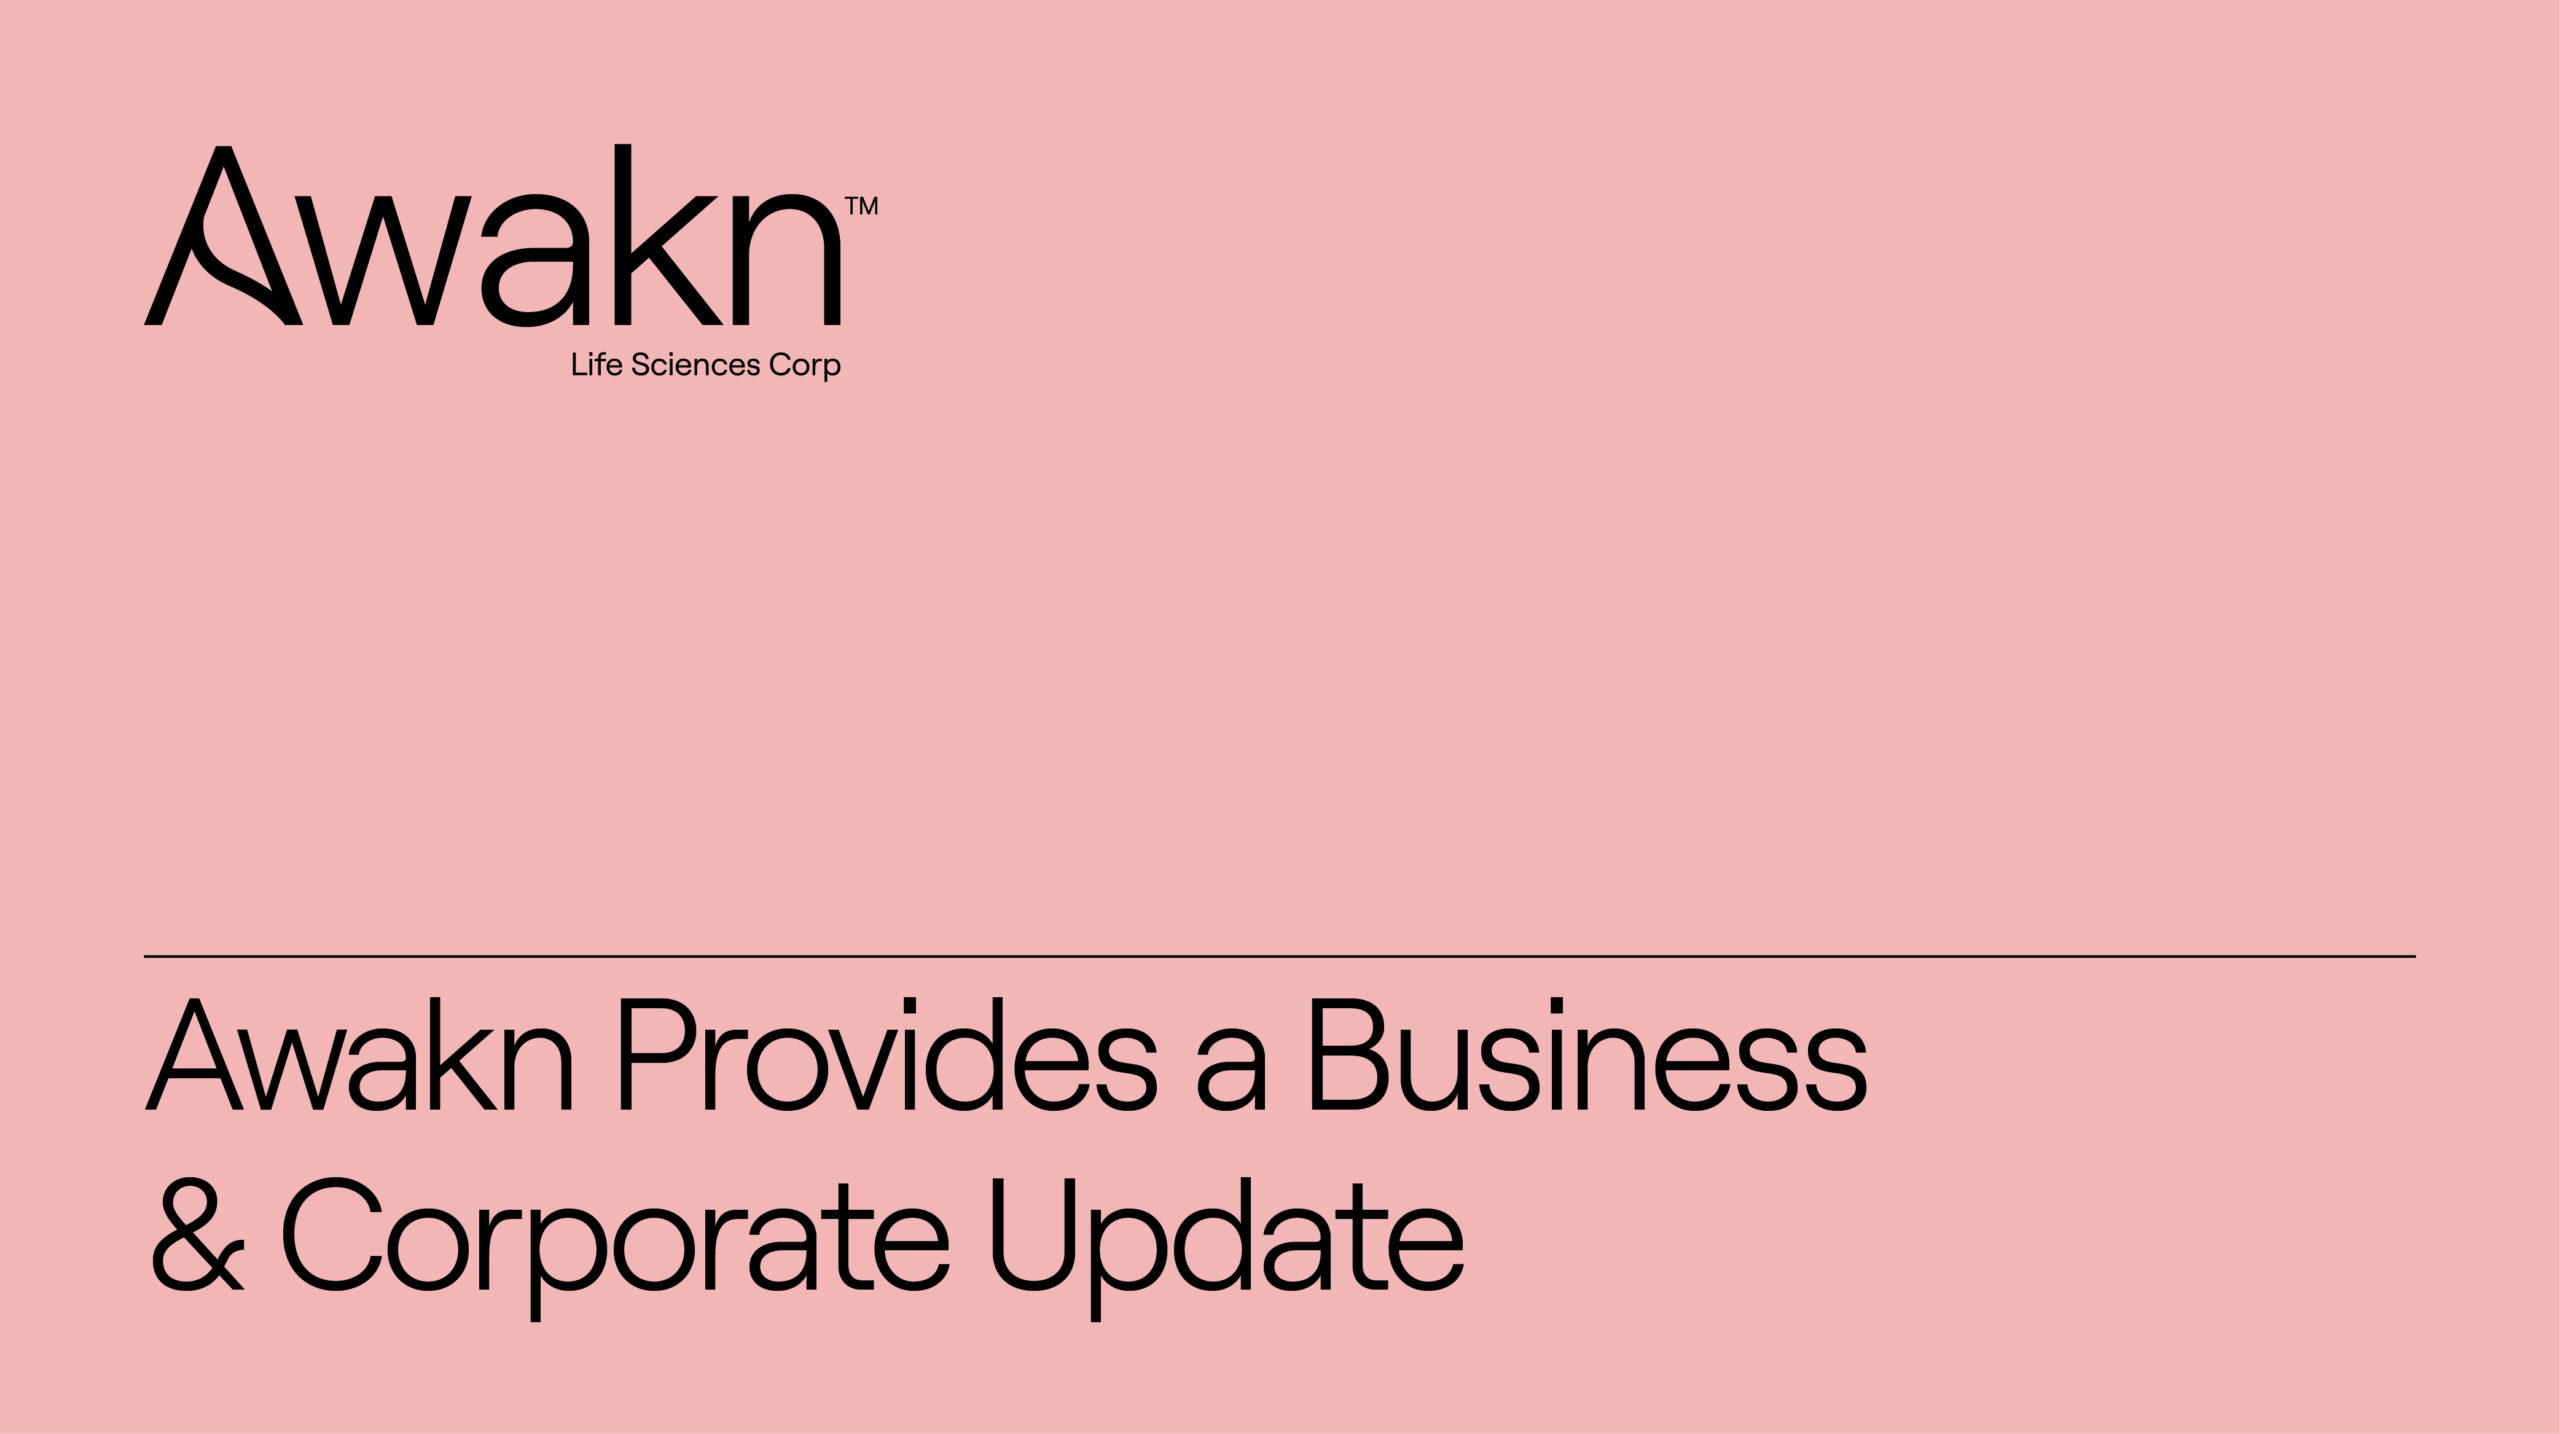 Awakn Life Sciences Provides a Business & Corporate Update